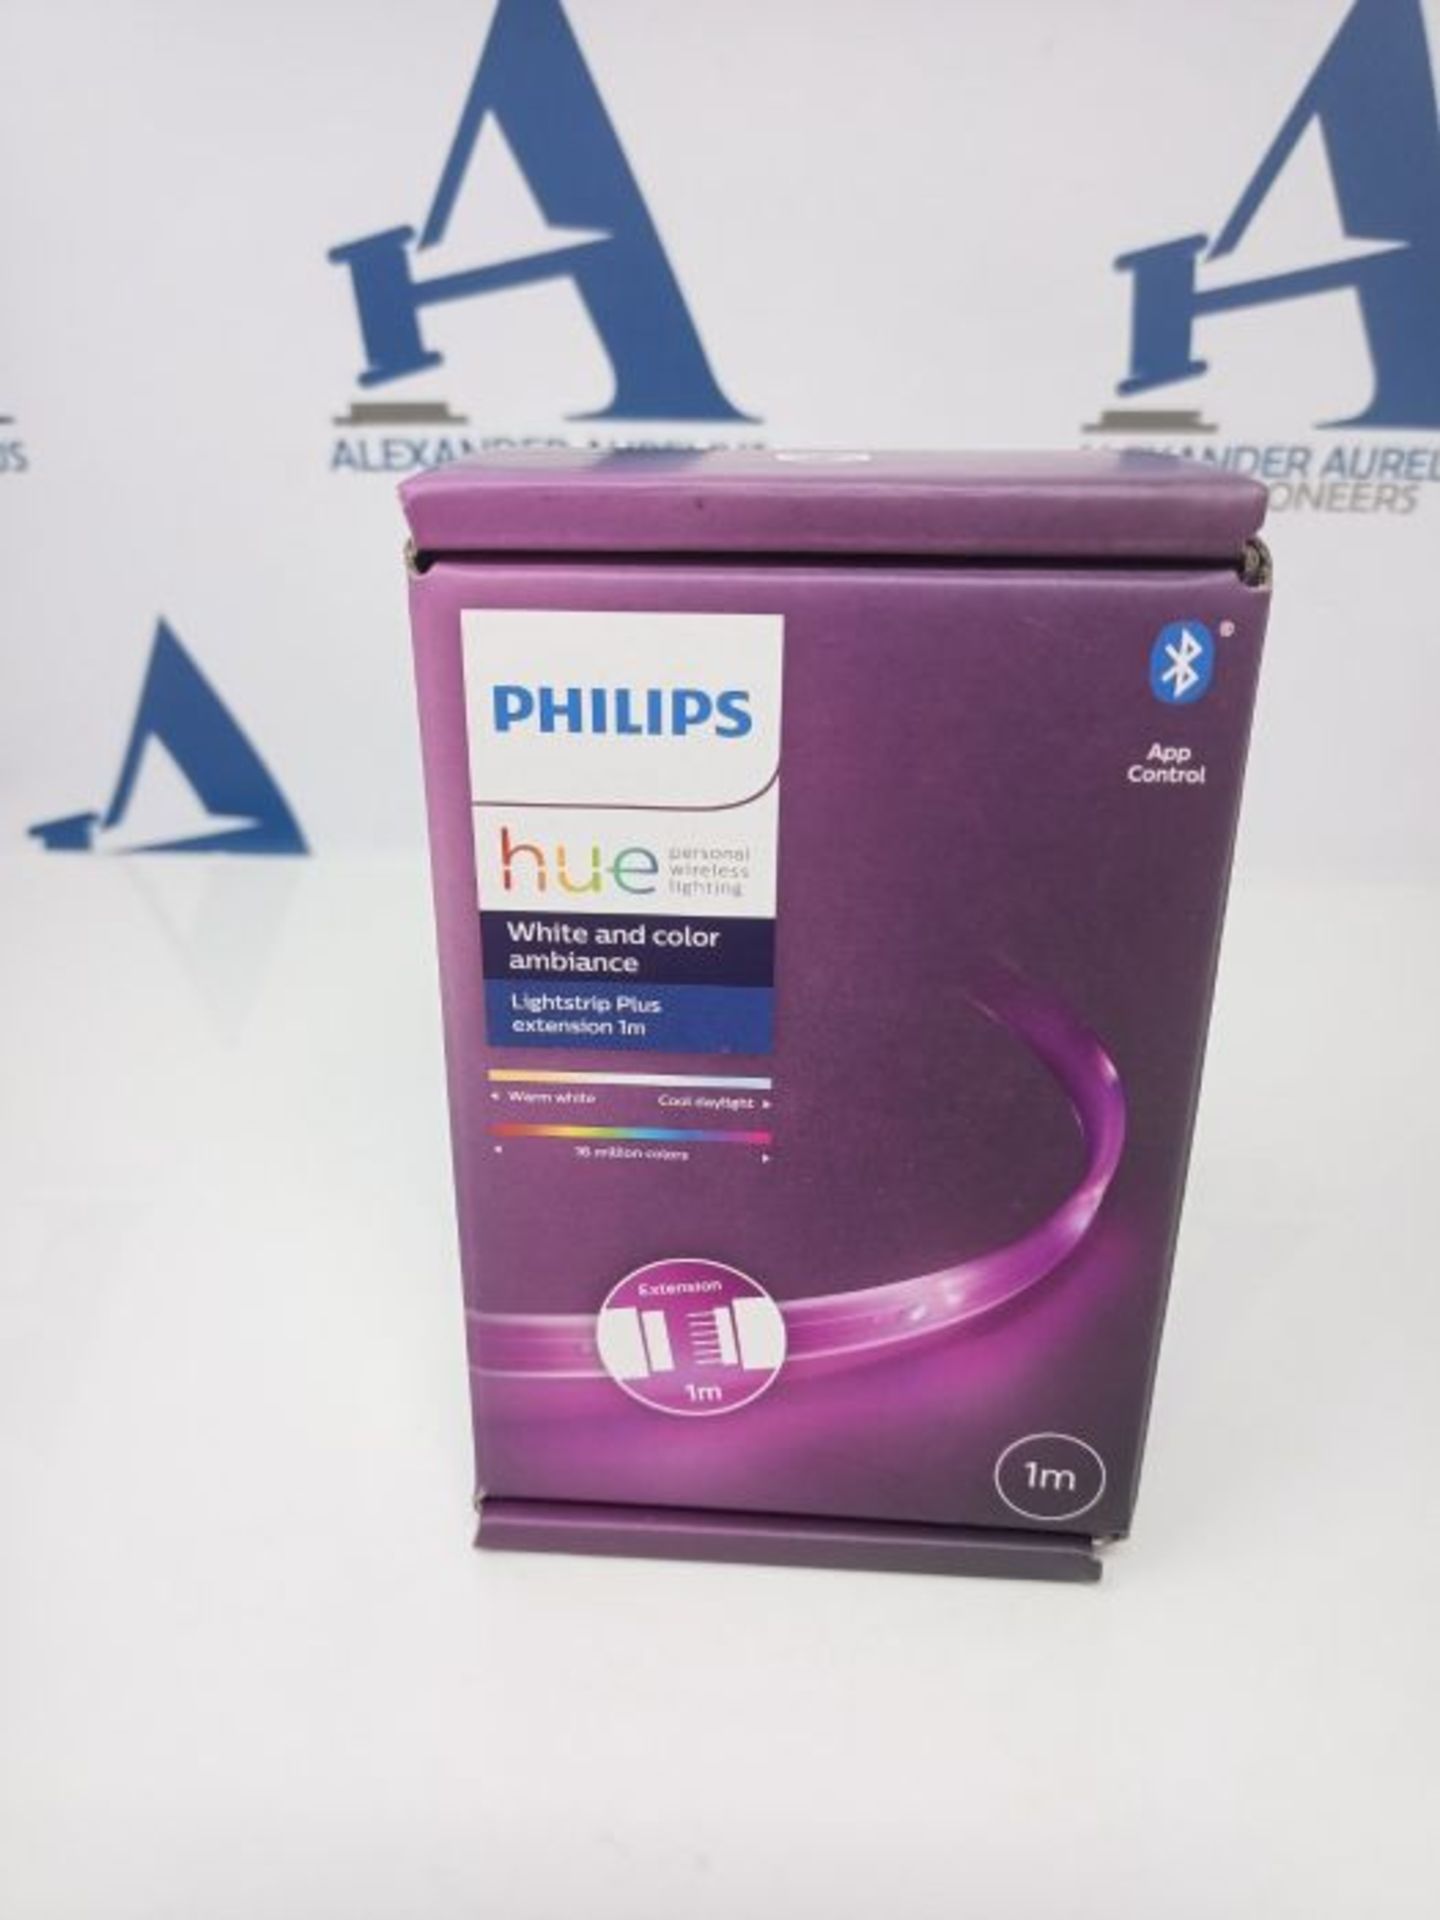 Philips Hue White & Color Ambiance Indoor LightStrips+ 1m extension et rallonge - Image 2 of 3